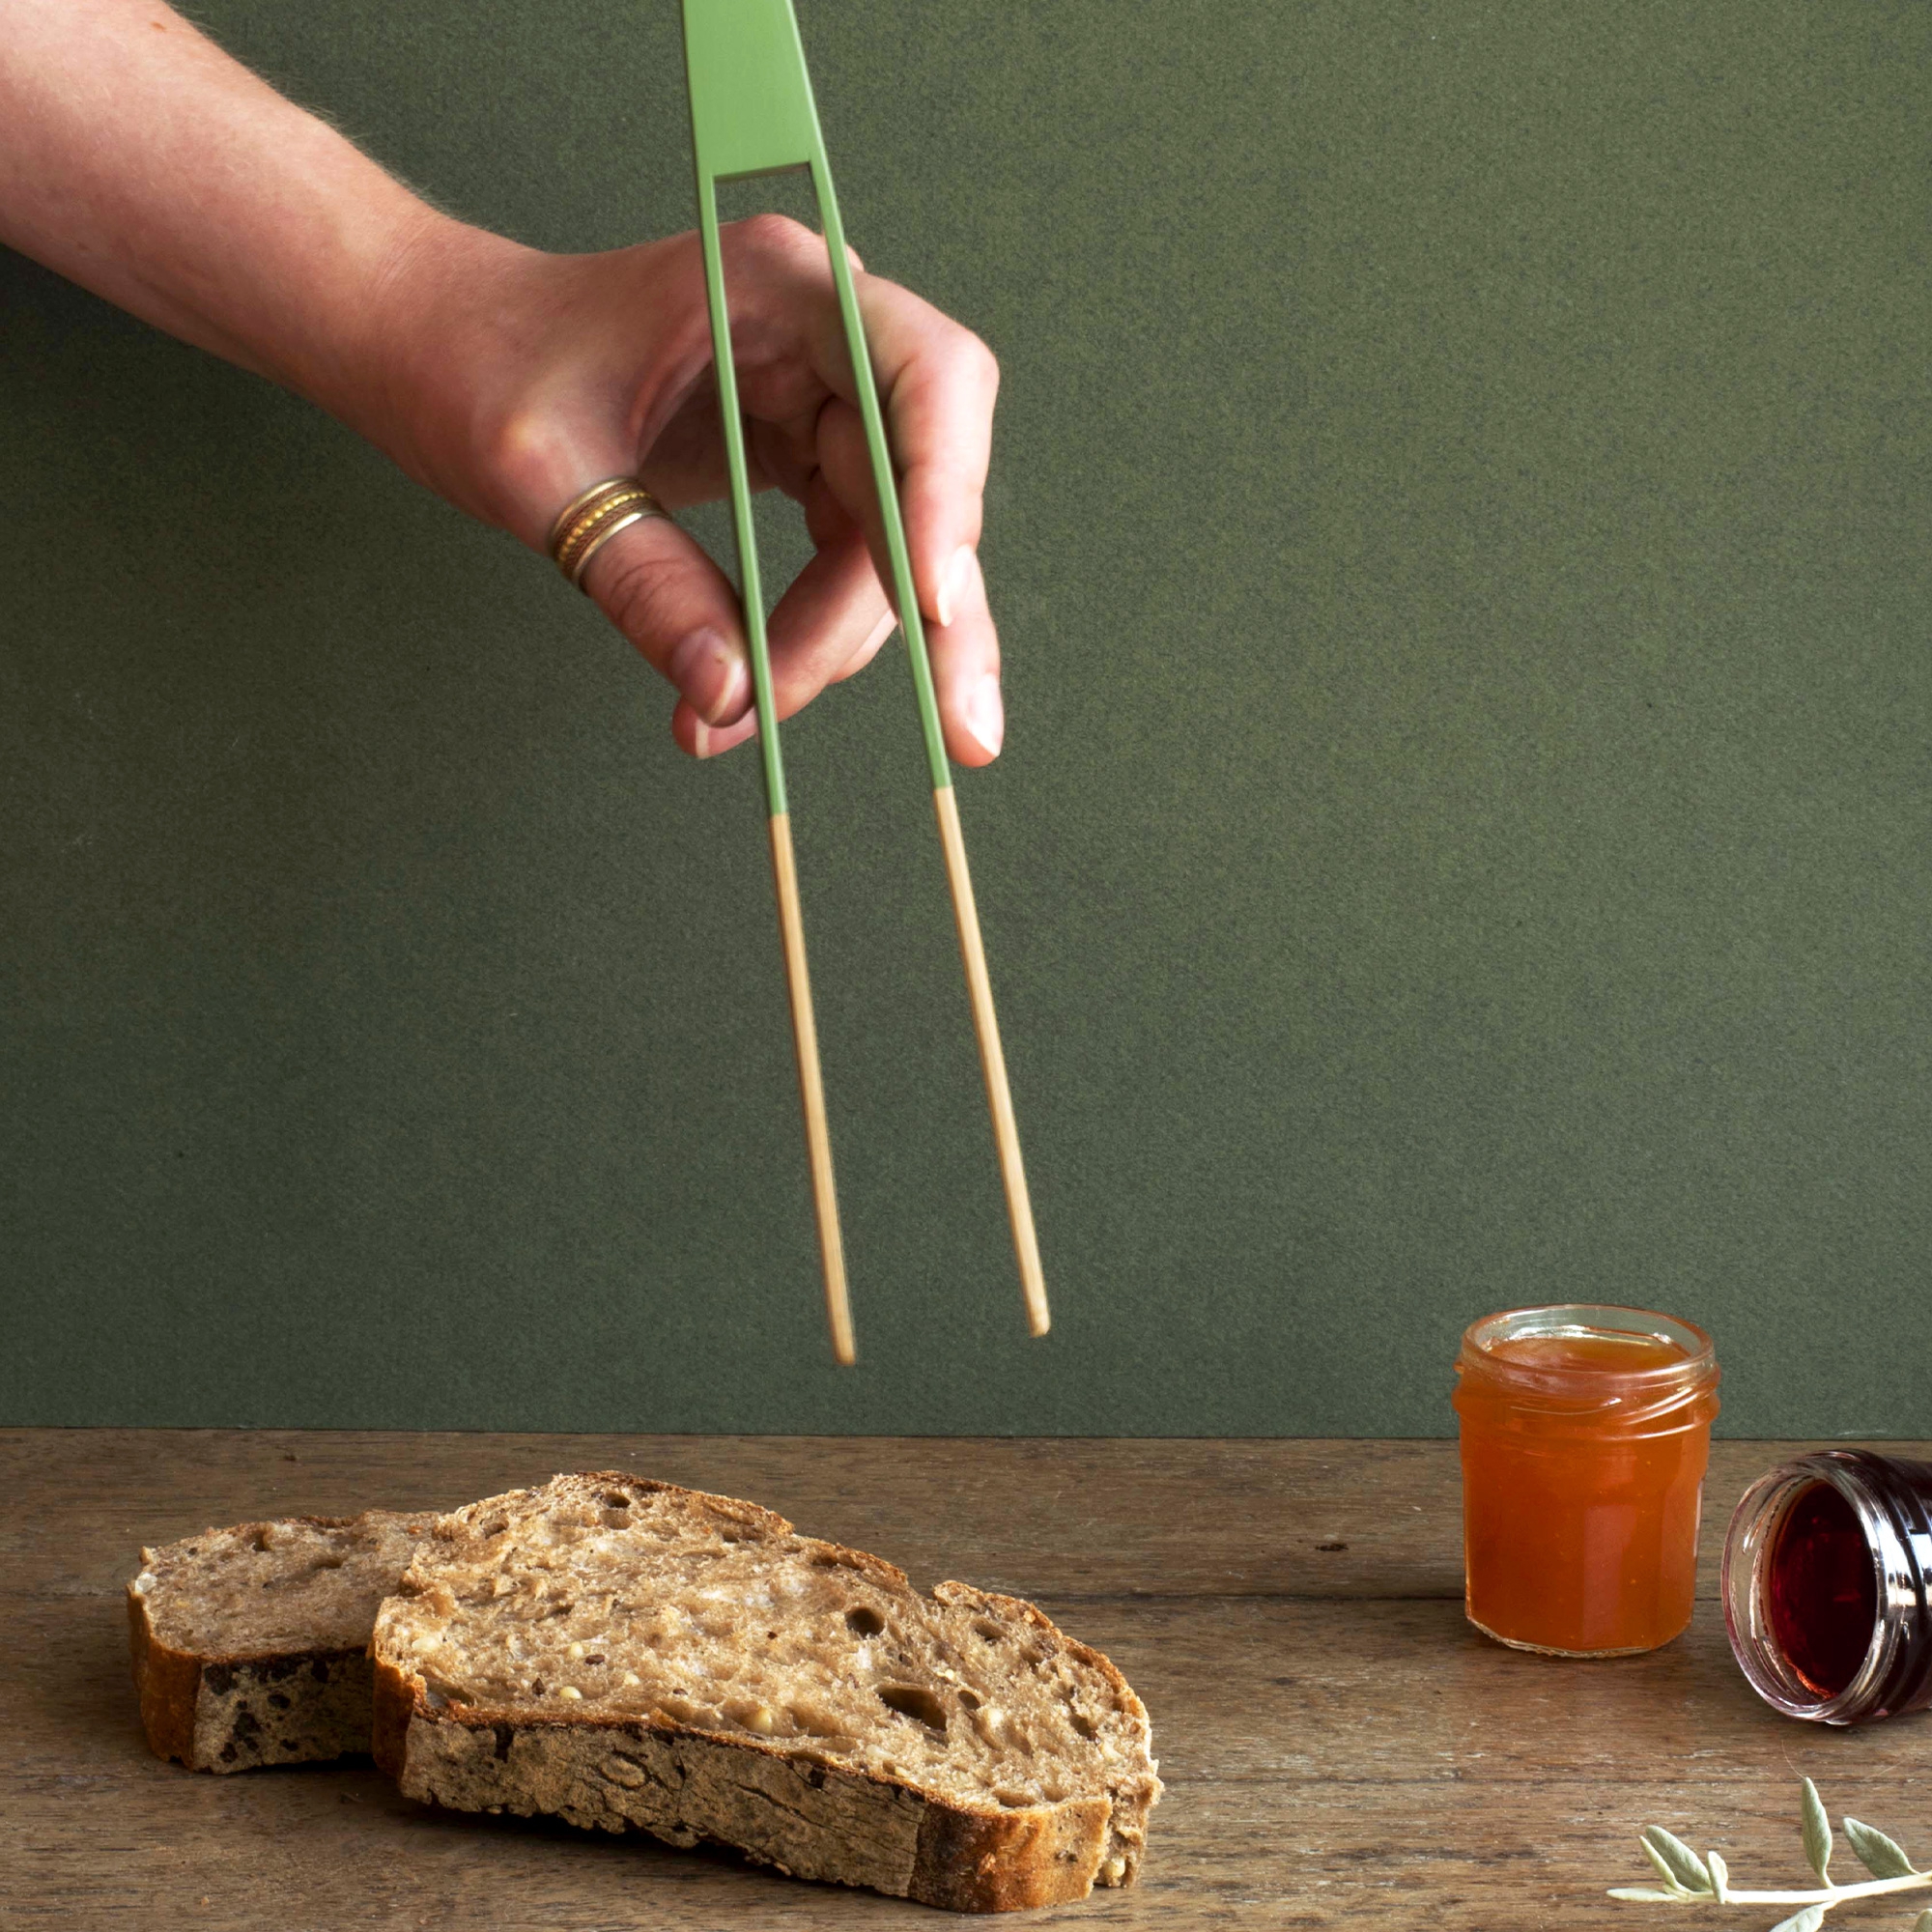 Pebbly - Magnetic Toast Tongs 24 cm - Bamboo ZEN - in different colours